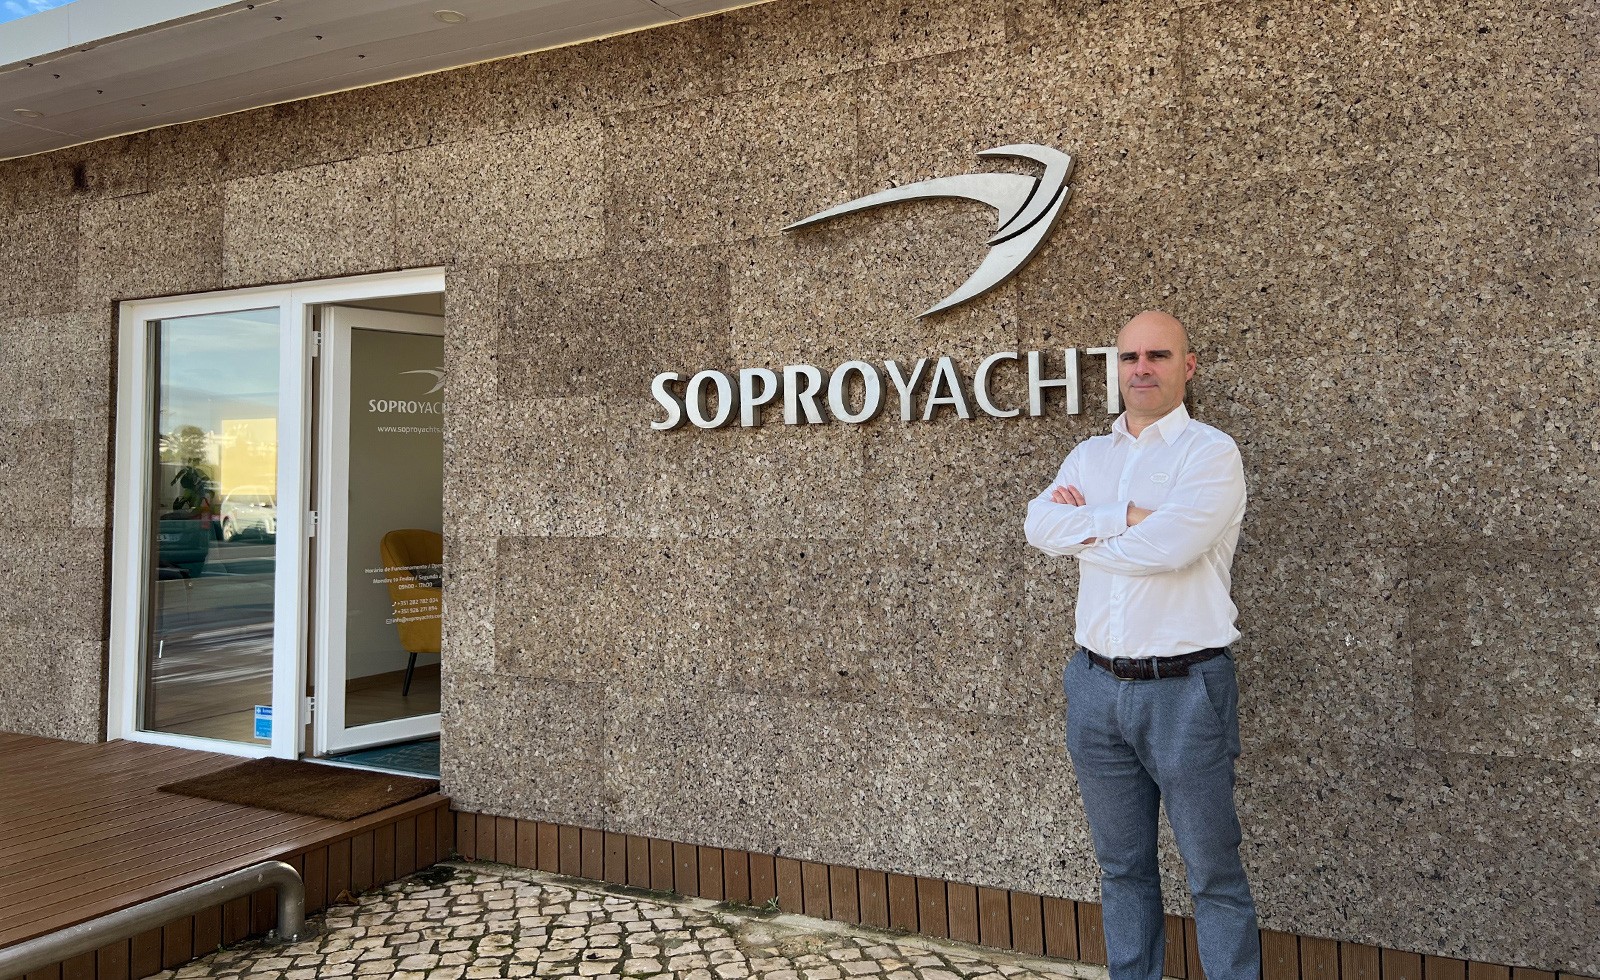 Sail in the new year with Soproyachts